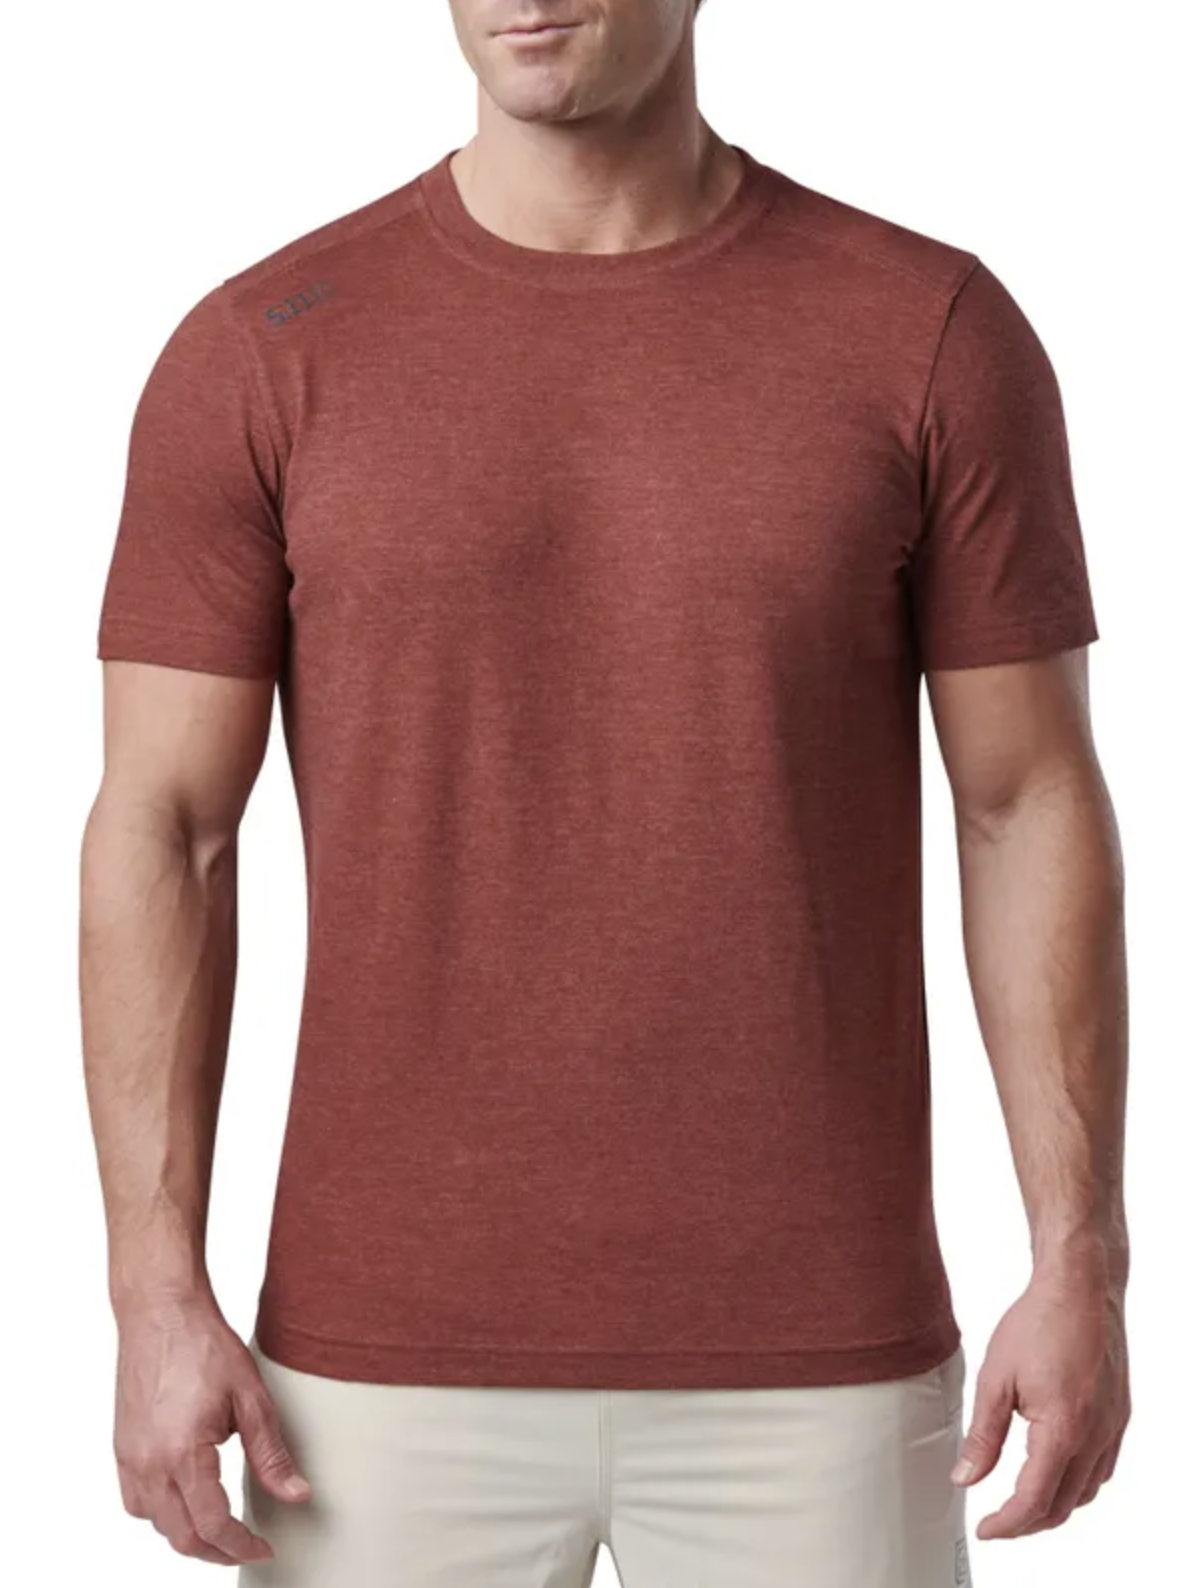 5.11 - PT-R Charge Short Sleeve Top 2.0 - Spartan Heather (621)